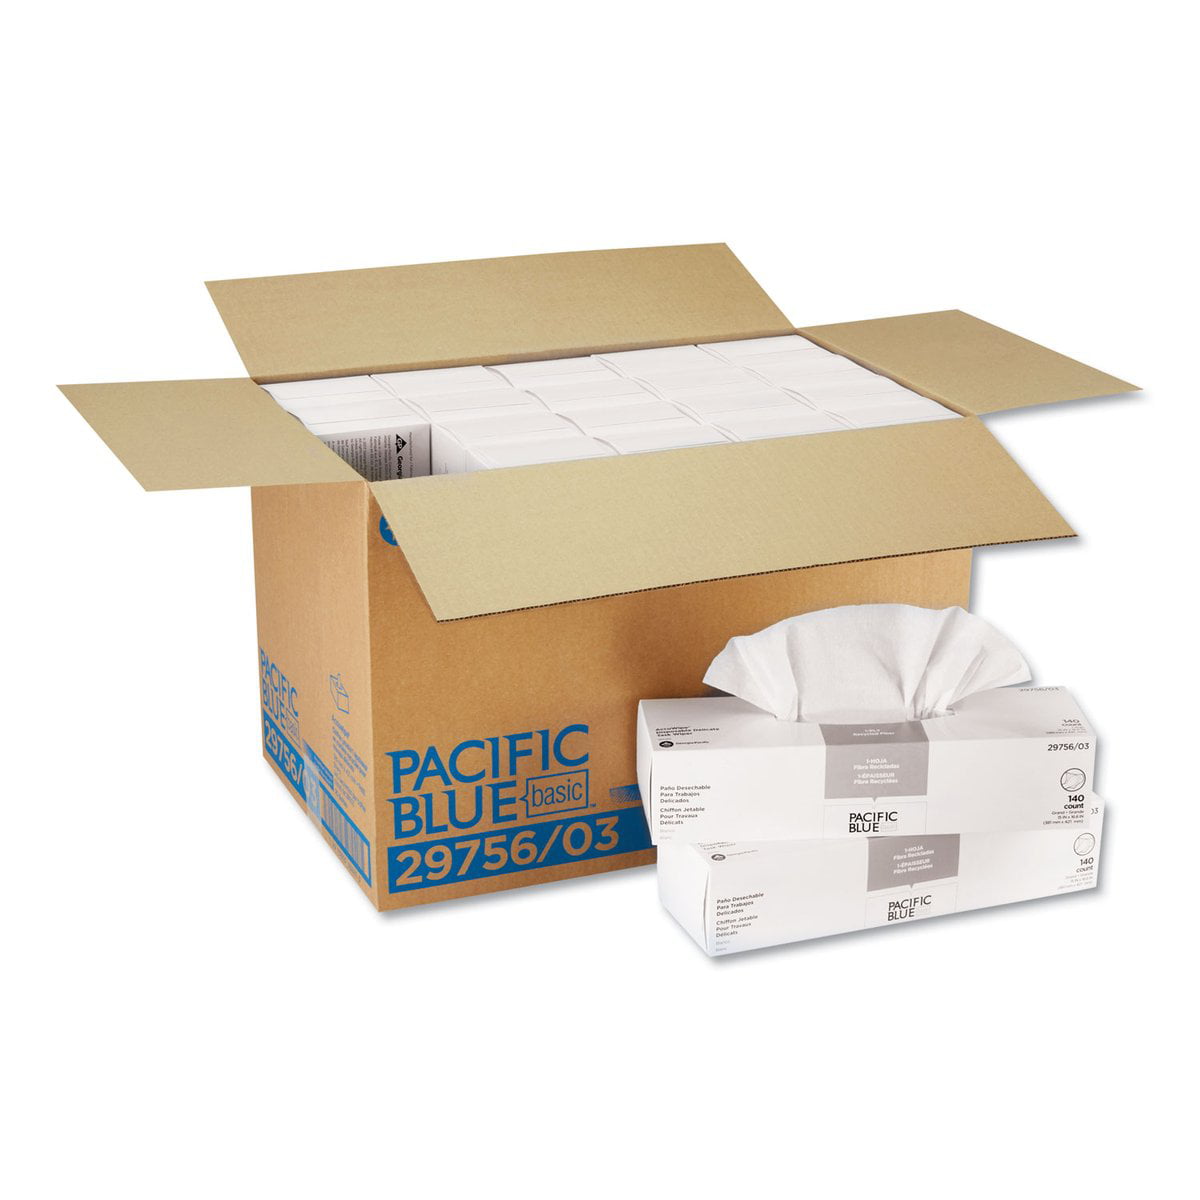 GP AccuWipe Recycled One-Ply Delicate Task Wipers Case of 60 boxes-280 wipes/box 